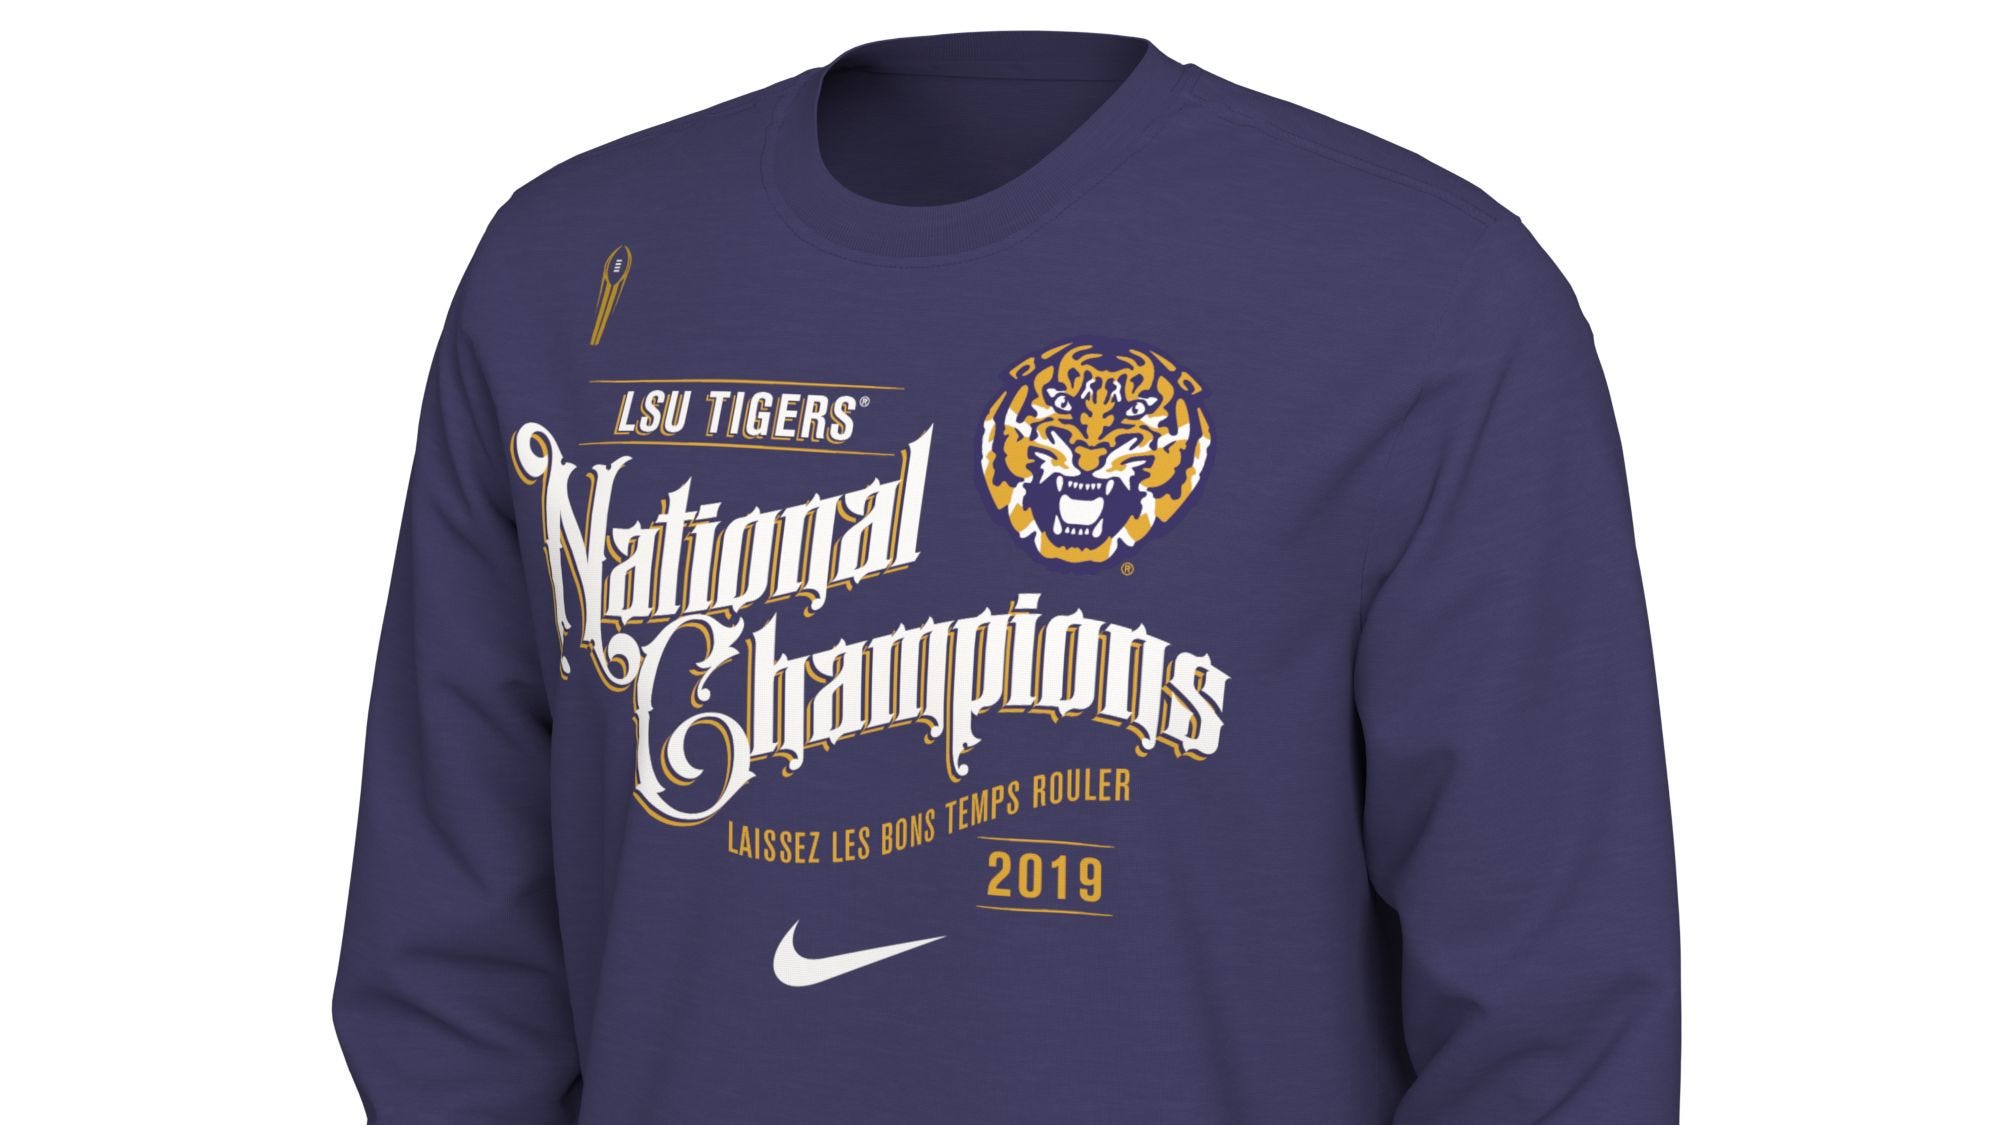 LSU Tigers National Championship gear Dick's Sporting Goods, Academy